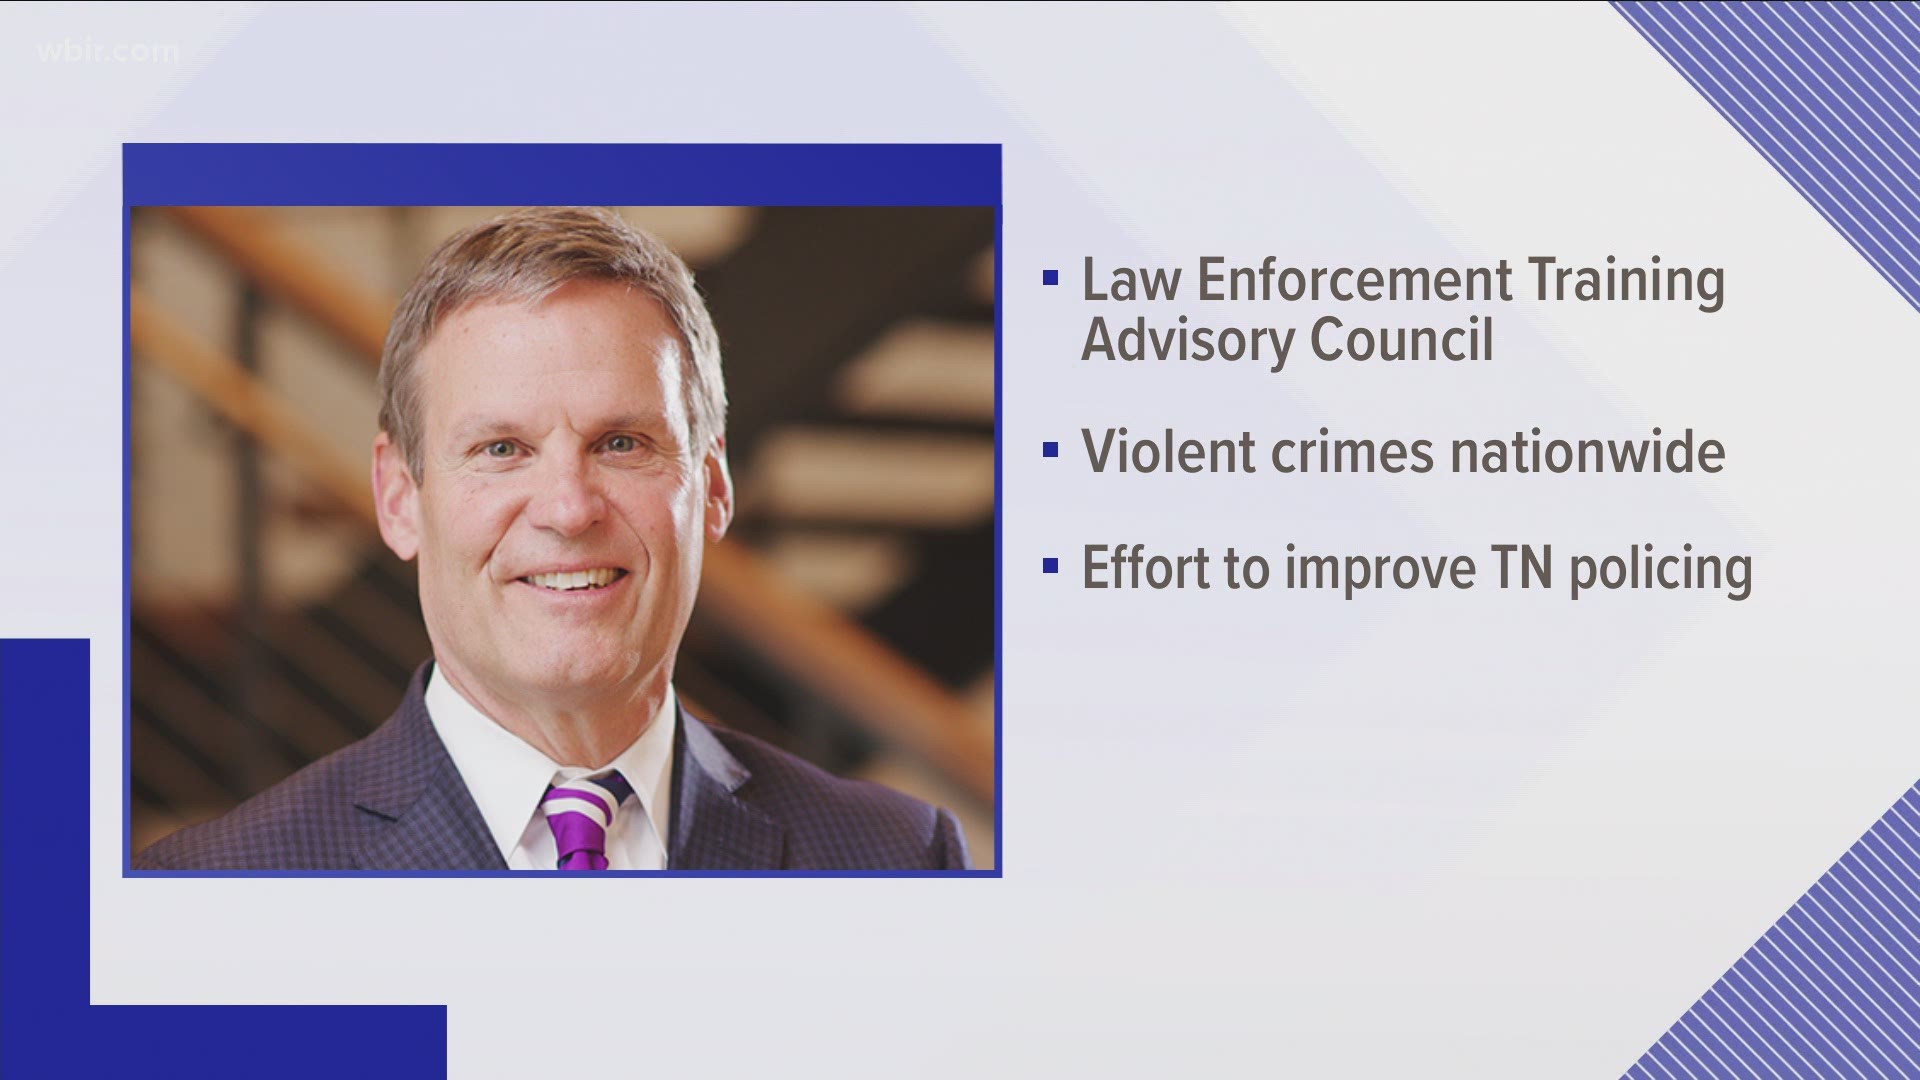 Governor Bill Lee spoke to the Law Enforcement Training Advisory Council about progress the state has made to improve policing in communities across Tennessee.